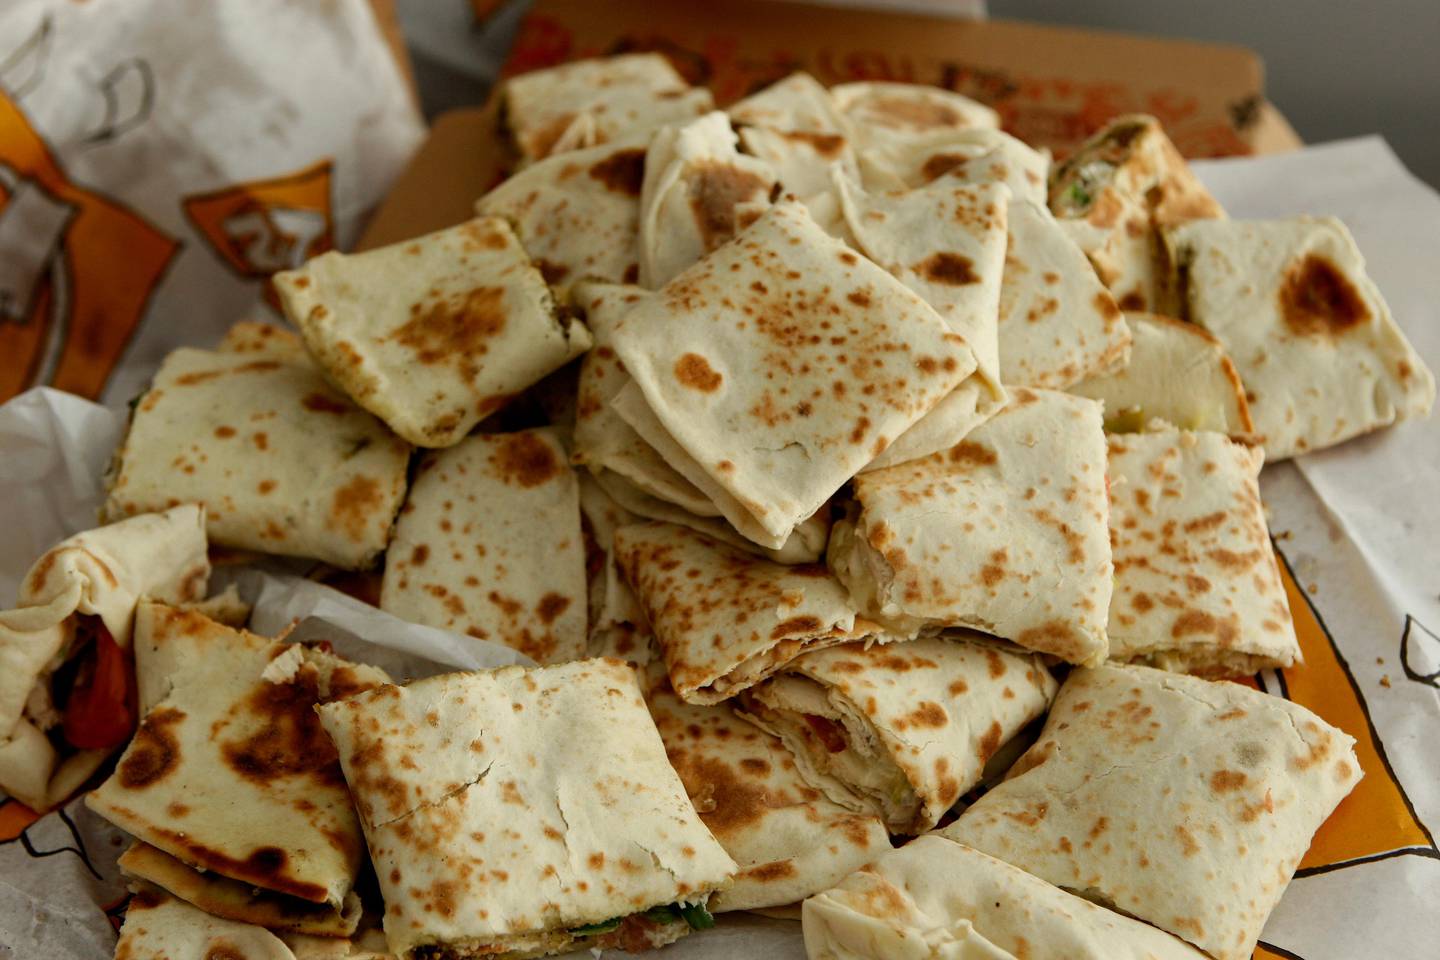 ABU DHABI, UNITED ARAB EMIRATES - November 11, 2008: Food wraps or sandwiches from Zaatar W Zeit restaurant for the Review section. ( Ryan Carter / The National ) *** Local Caption *** RC010-FoodDelivery.JPG